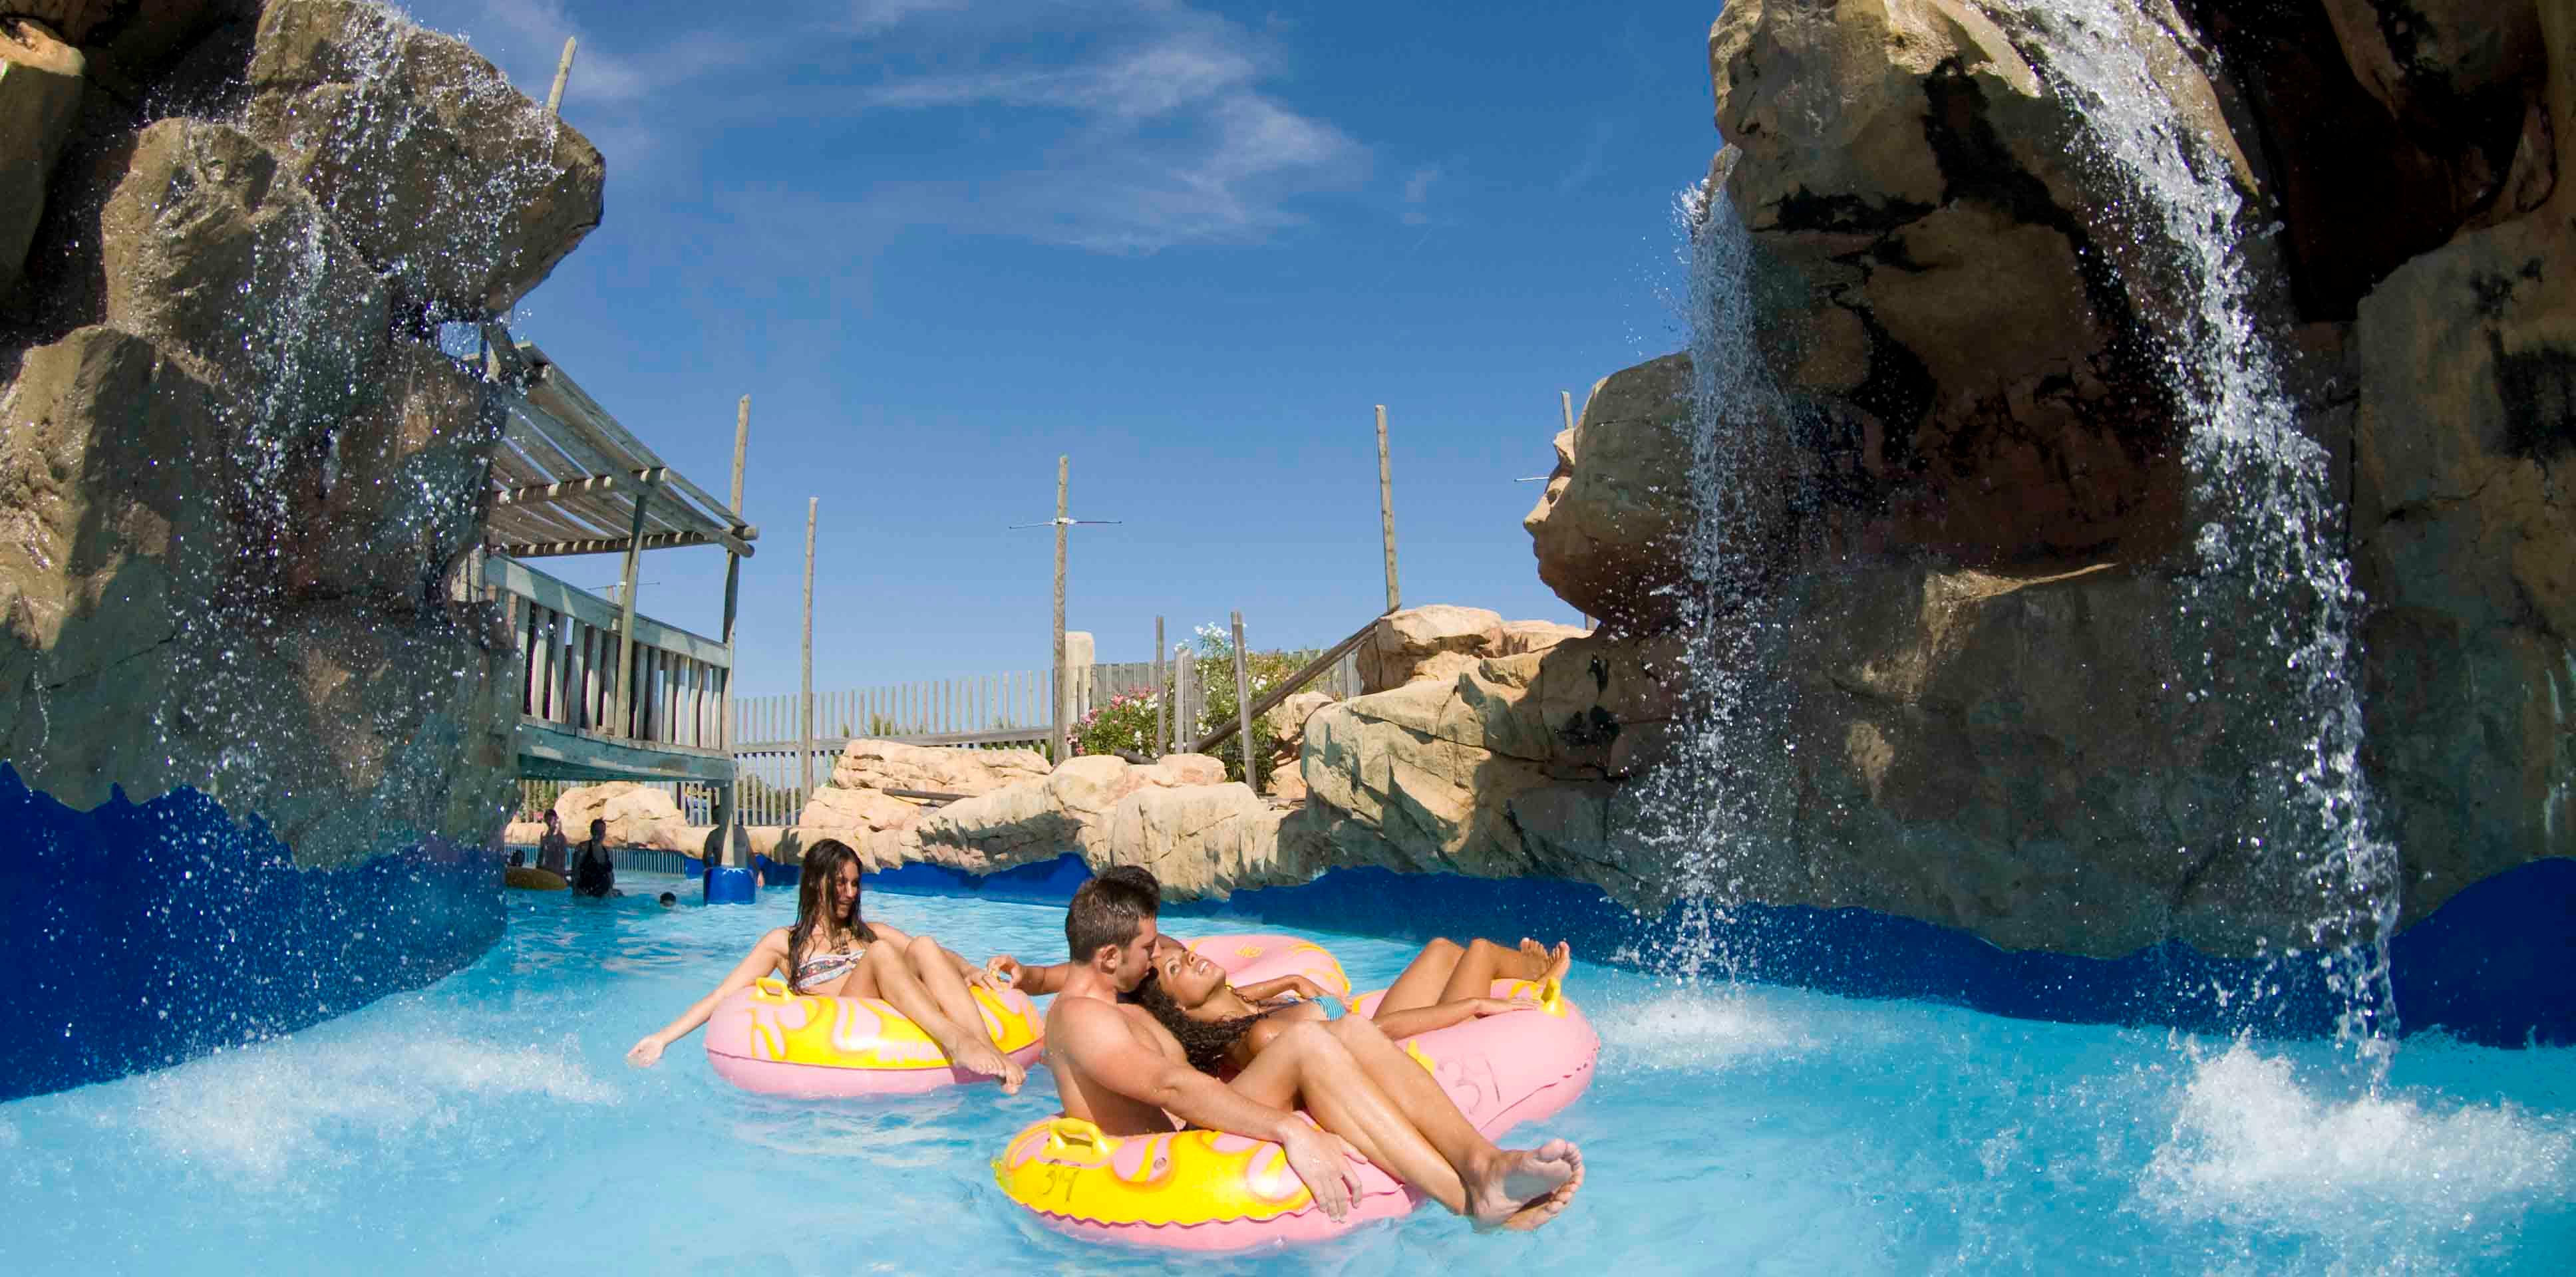 Day Trip to Western Water Park, Palma de Mallorca – Hotel pick-up/drop-off